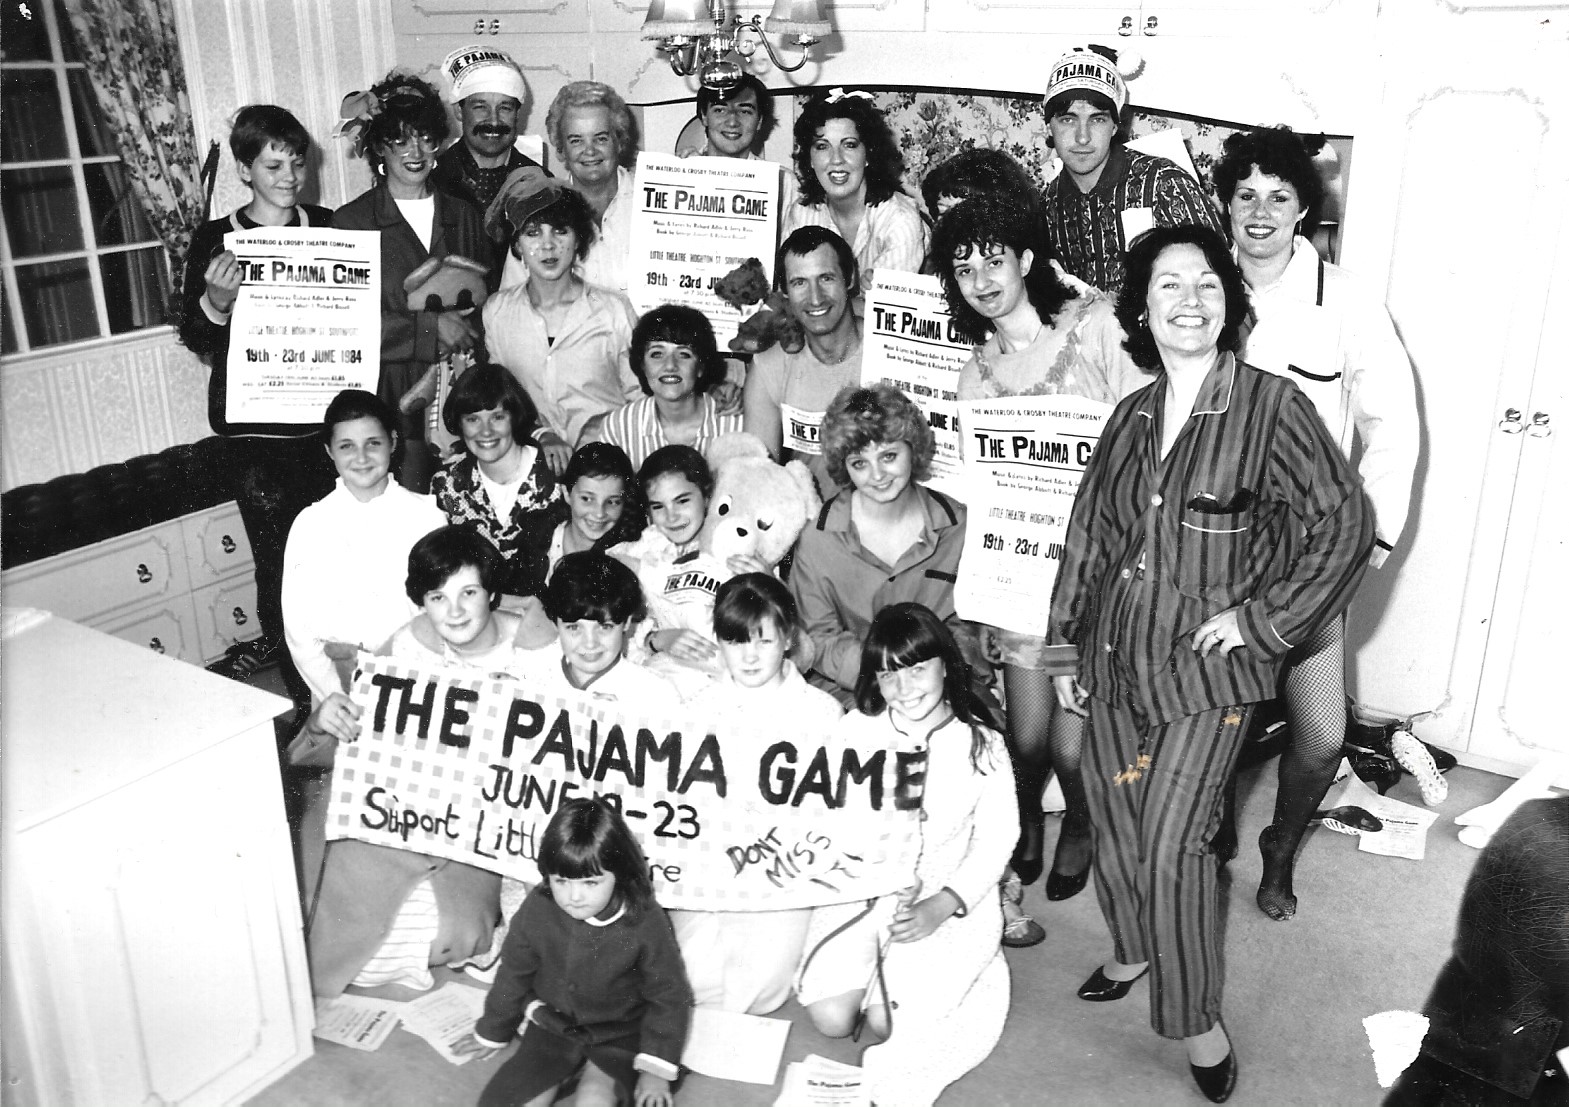 The Waterloo & Crosby Theatre Company performed The Pajama Game at the Little Theatre in Southport 19-23 June 1984